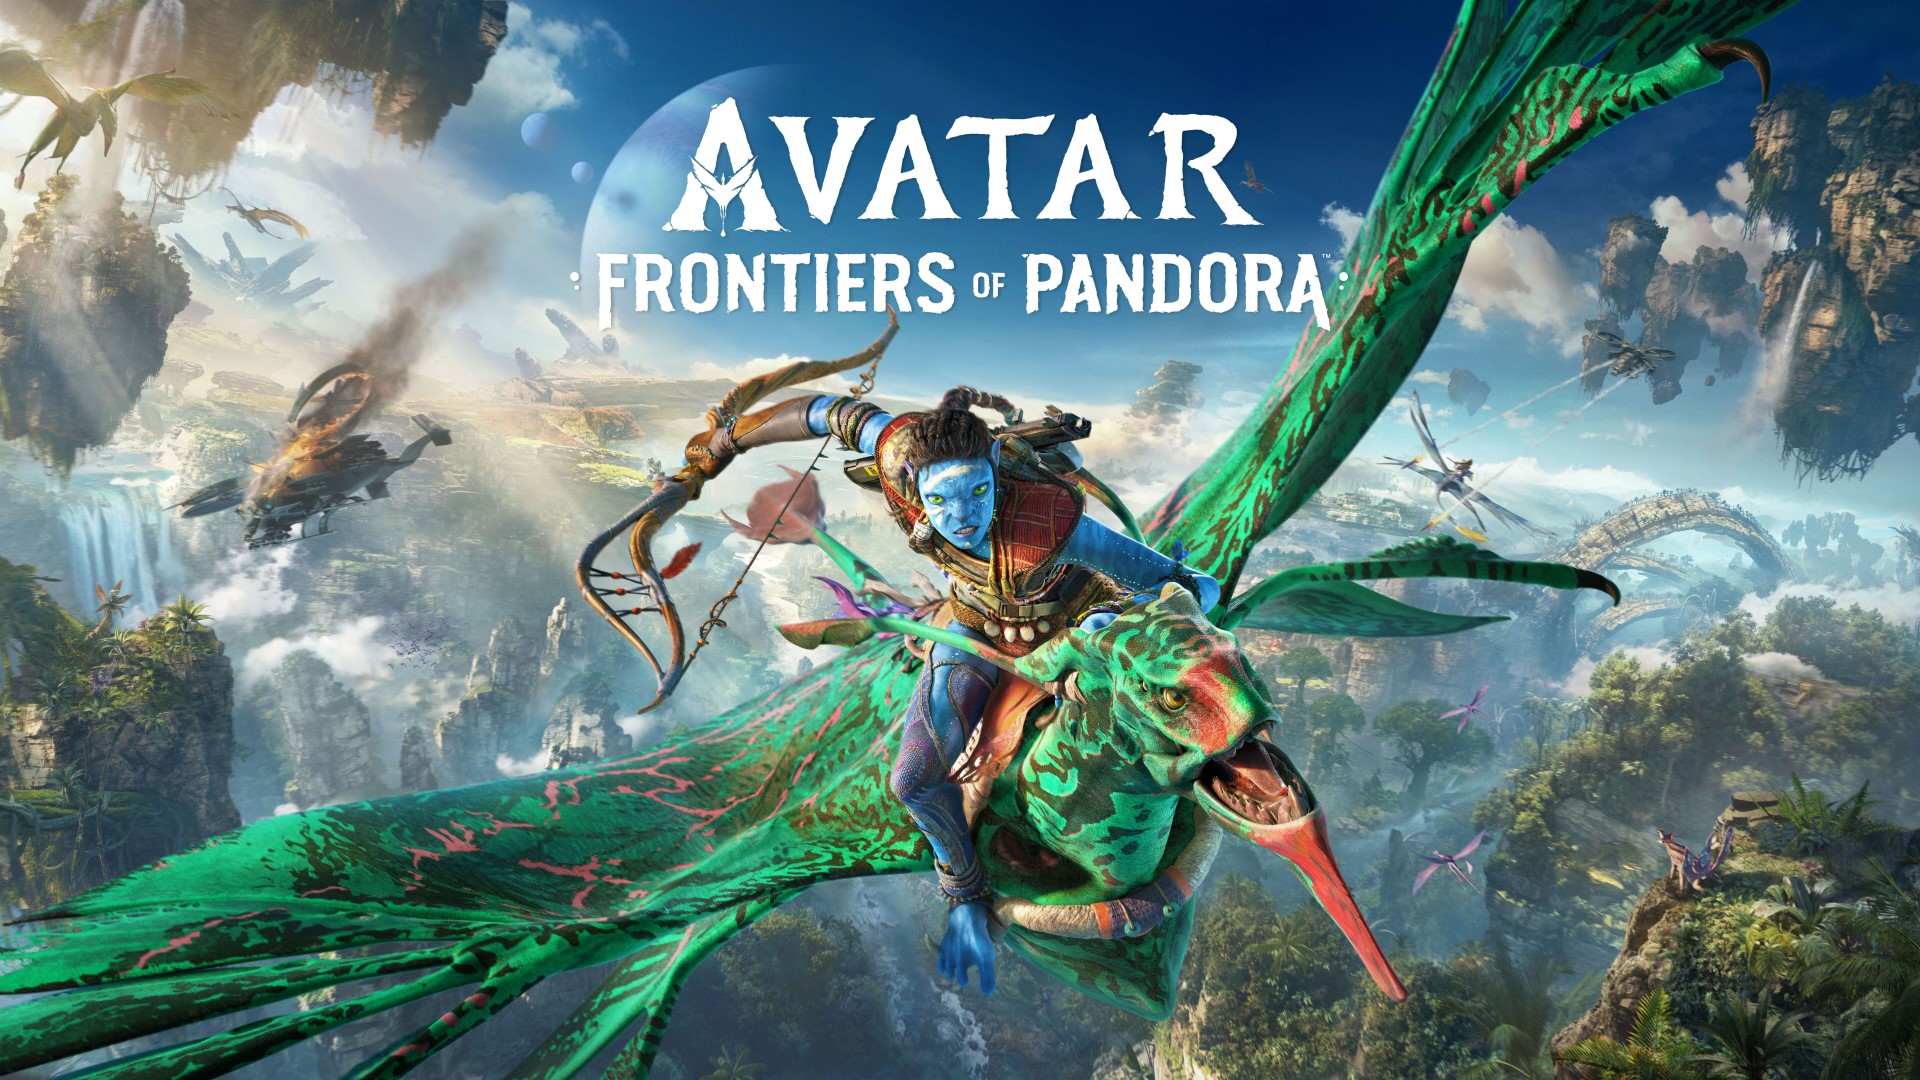 10 New Details We’ve Learned About Avatar: Frontiers of Pandora